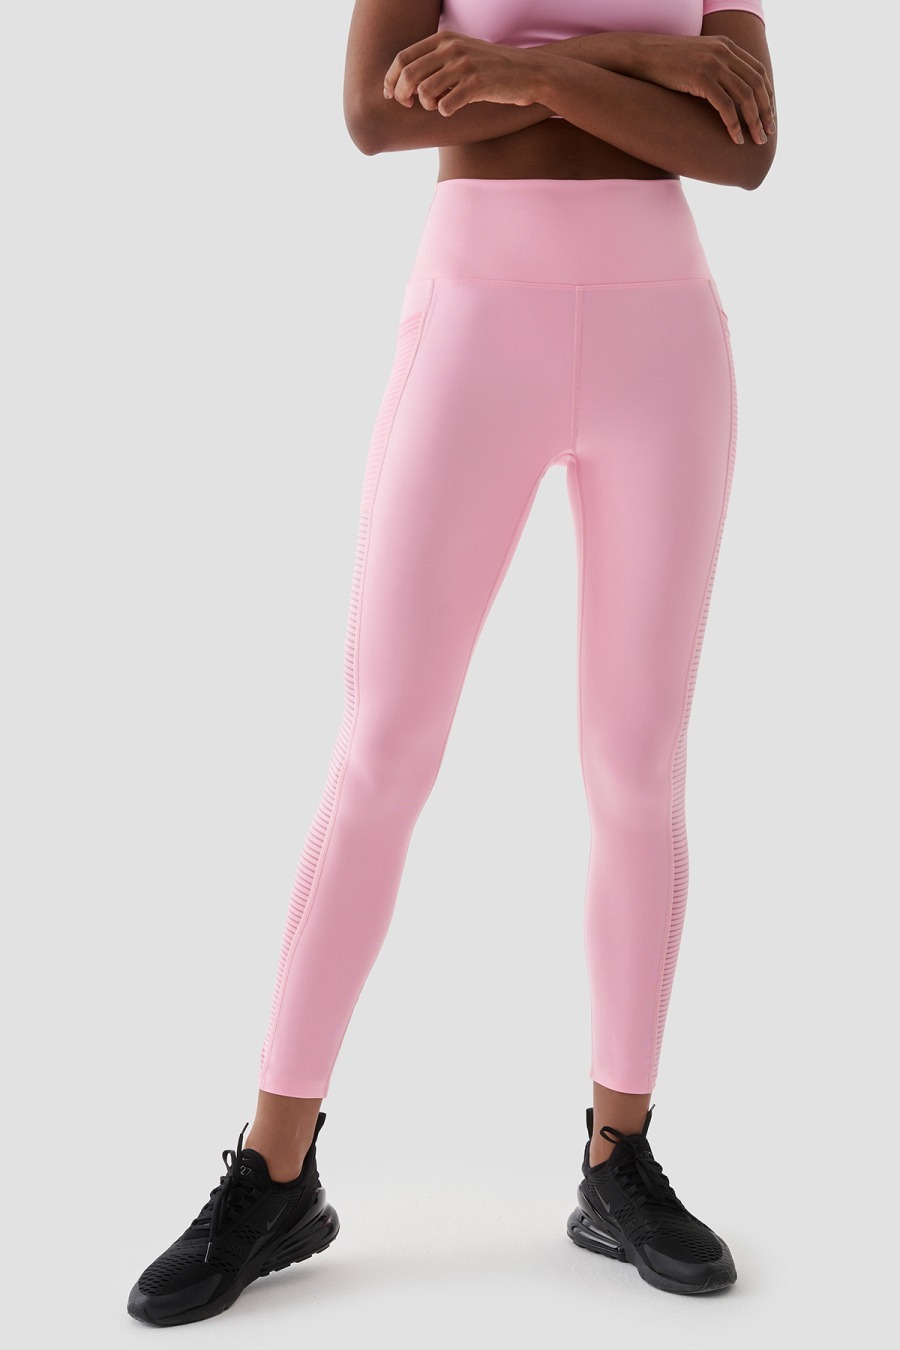 SS2432 19 PiNK 19 1